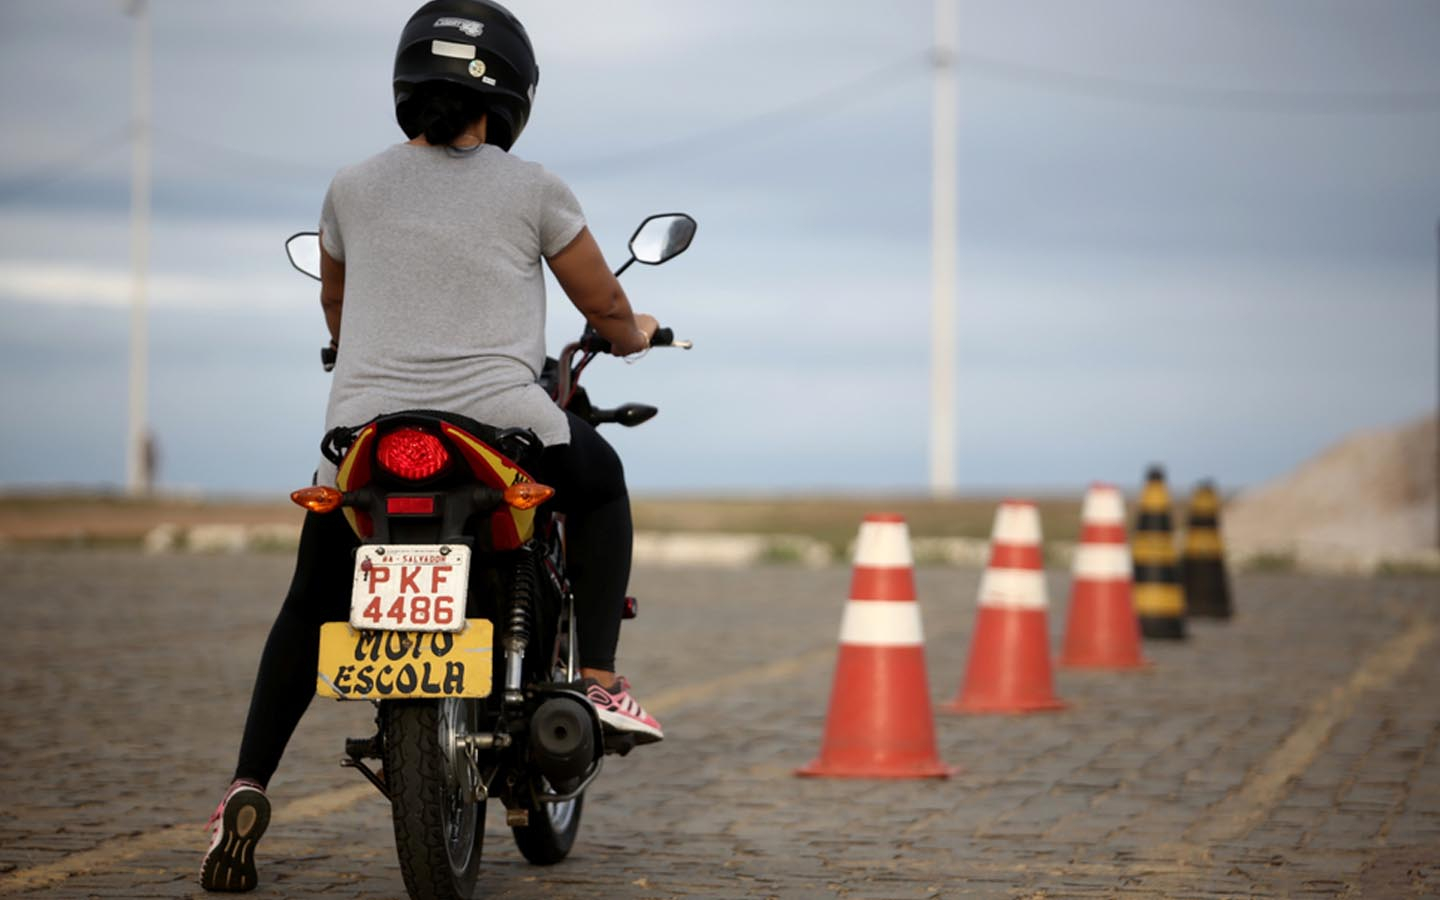 Motorcycle Licence In Dubai Fees Requirements More Mybayut throughout proportions 1440 X 900